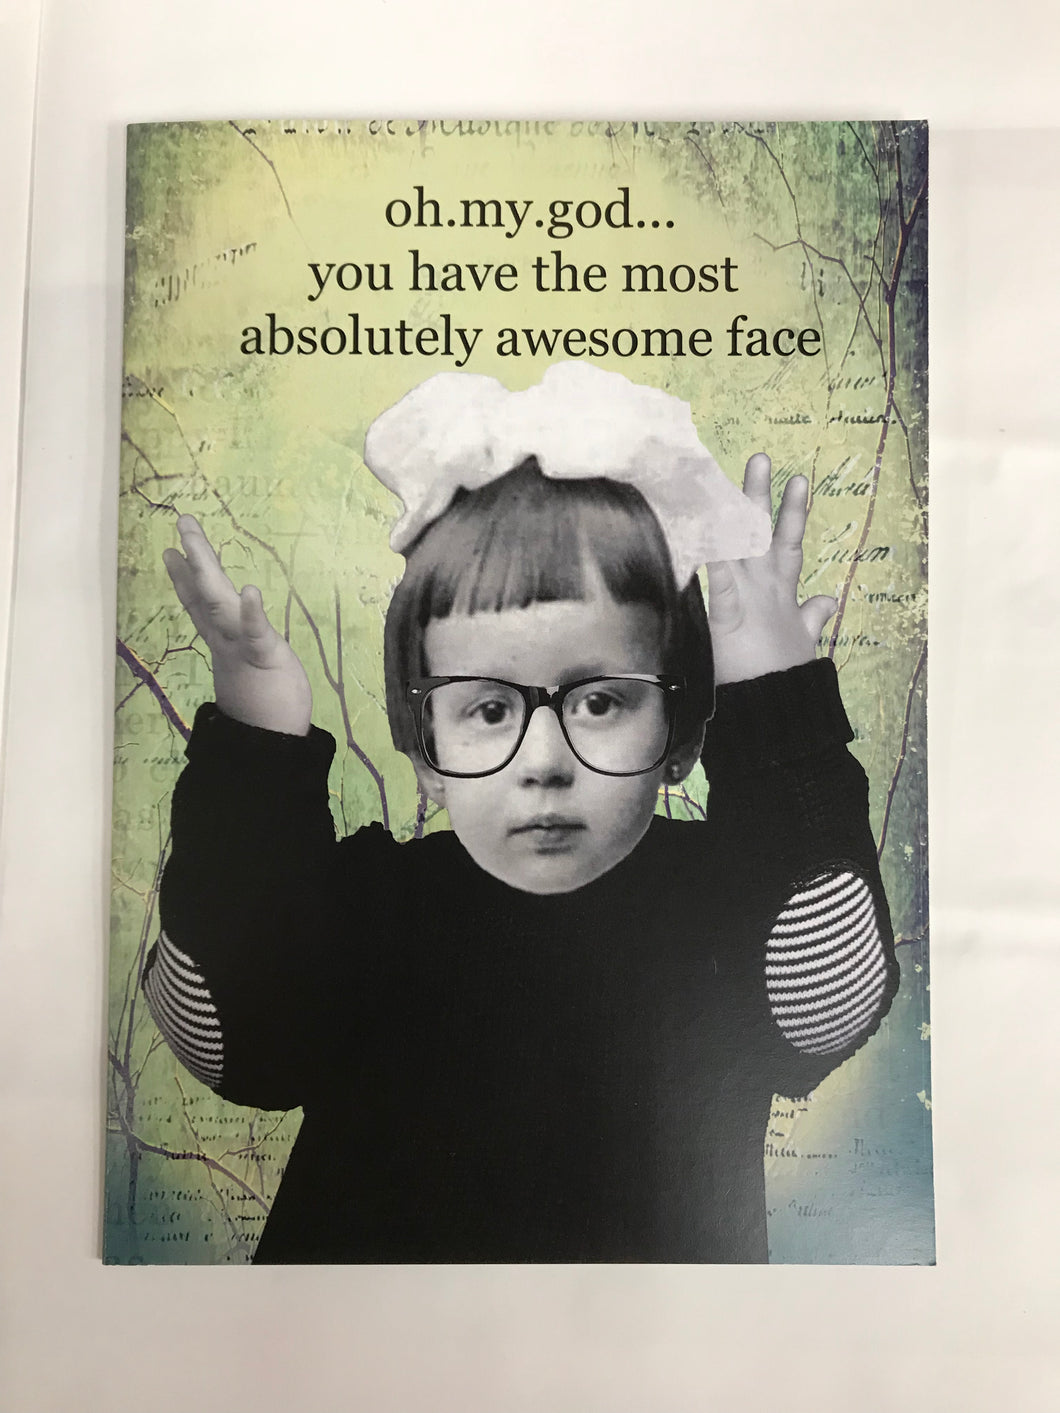 Oh Oh My God.. You have the most absolutely awesome face   Snarky Greeting Card by Erin Smith